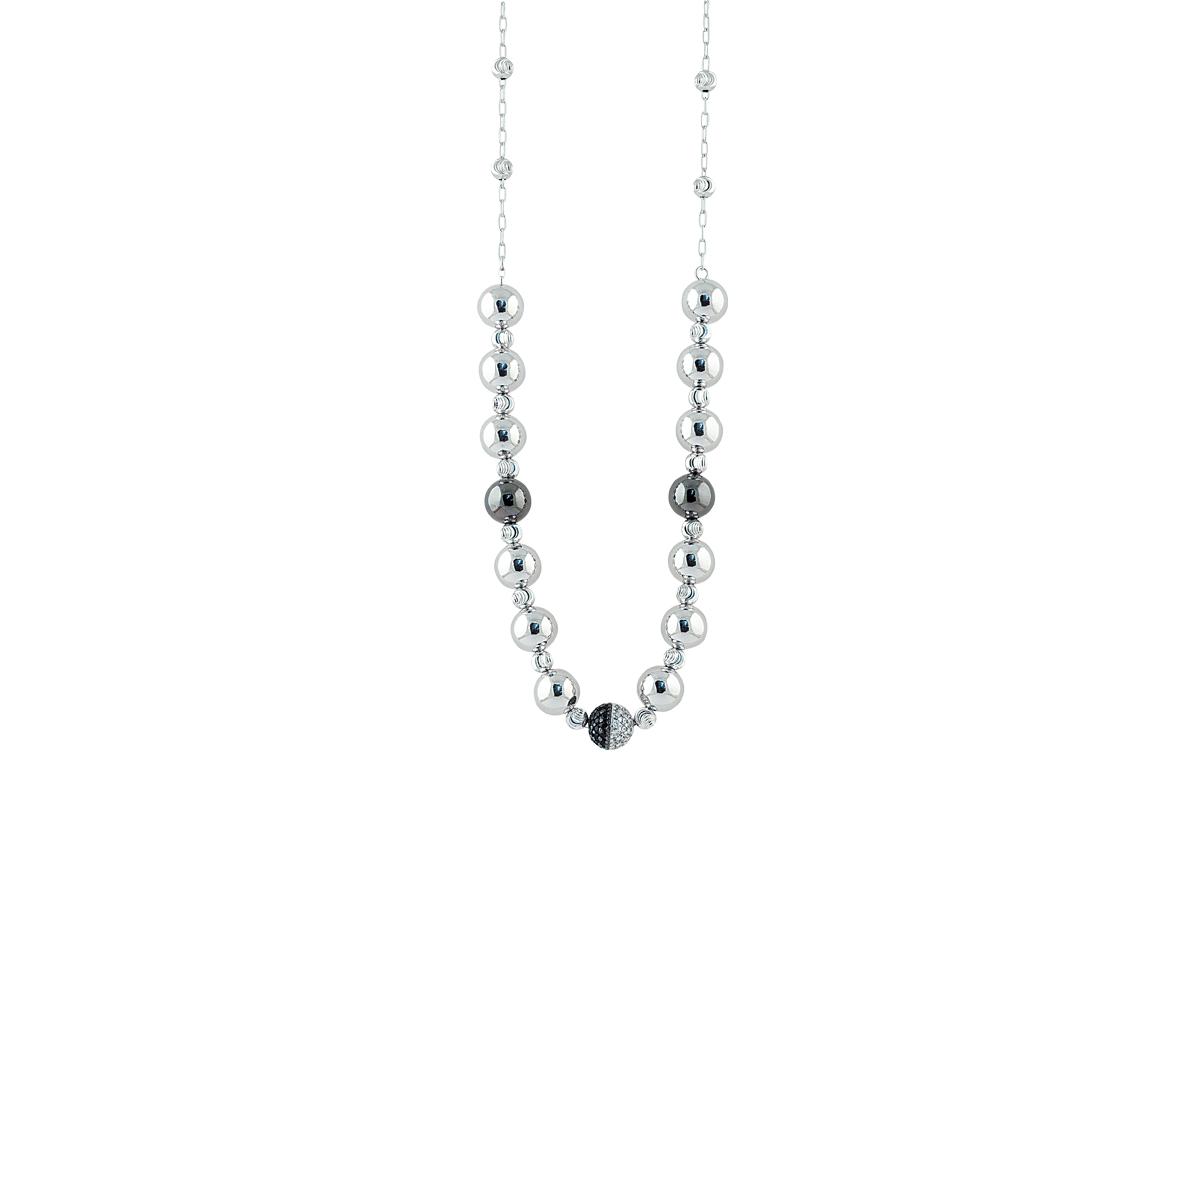 Choker necklace in rhodium silver and ruthenium, with cubic zirconia boule pavé - ZCL898-LL